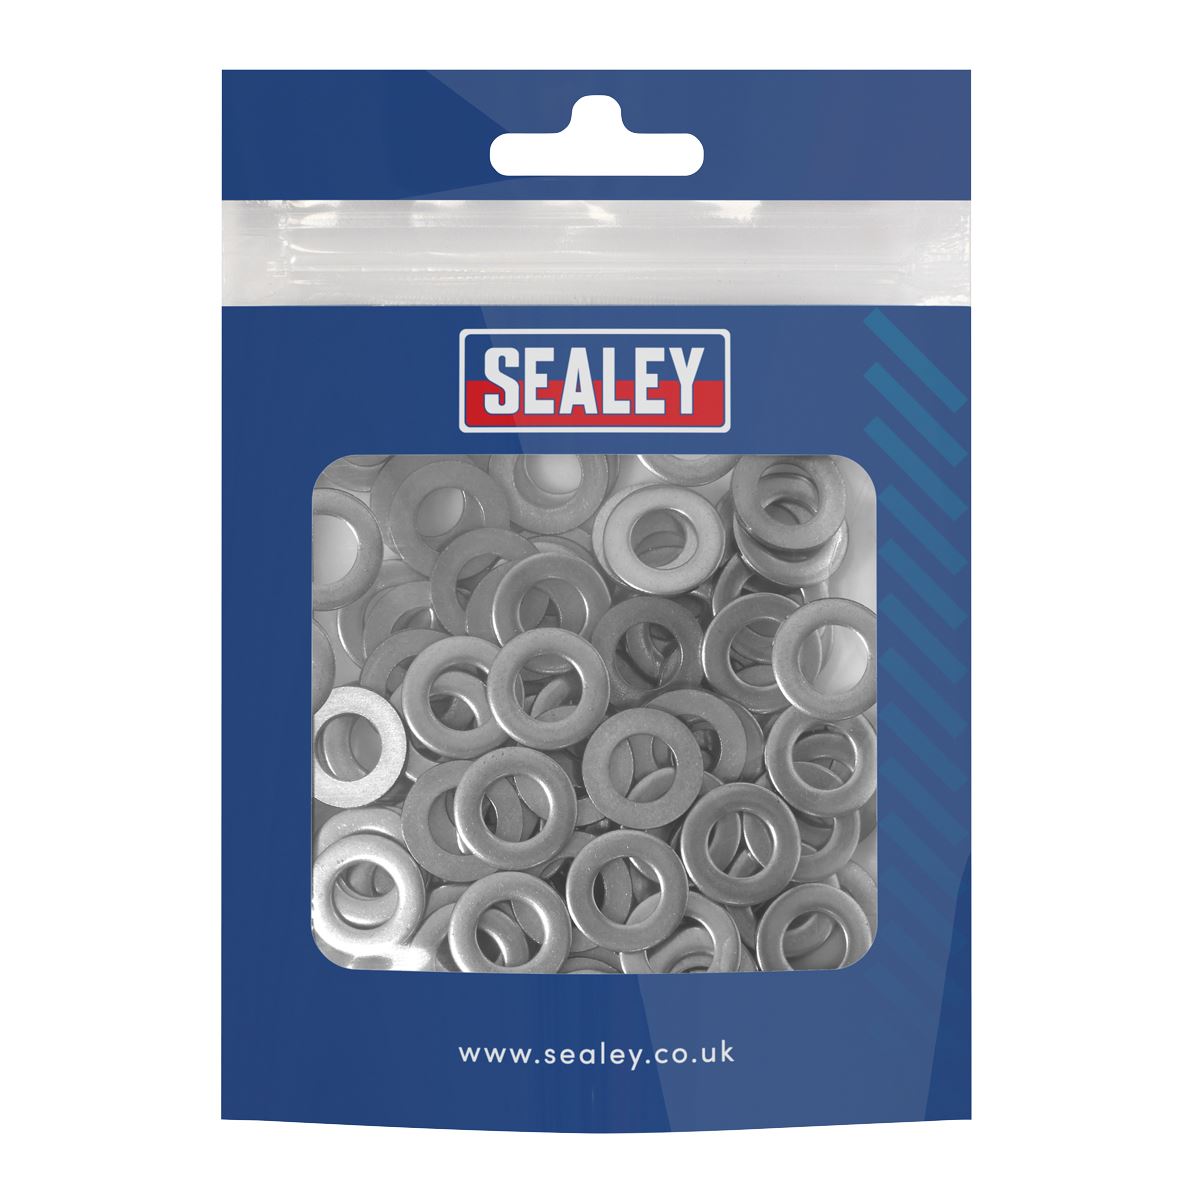 Sealey Stainless Steel Flat Washer Din 125 – M8 - Pack of 100